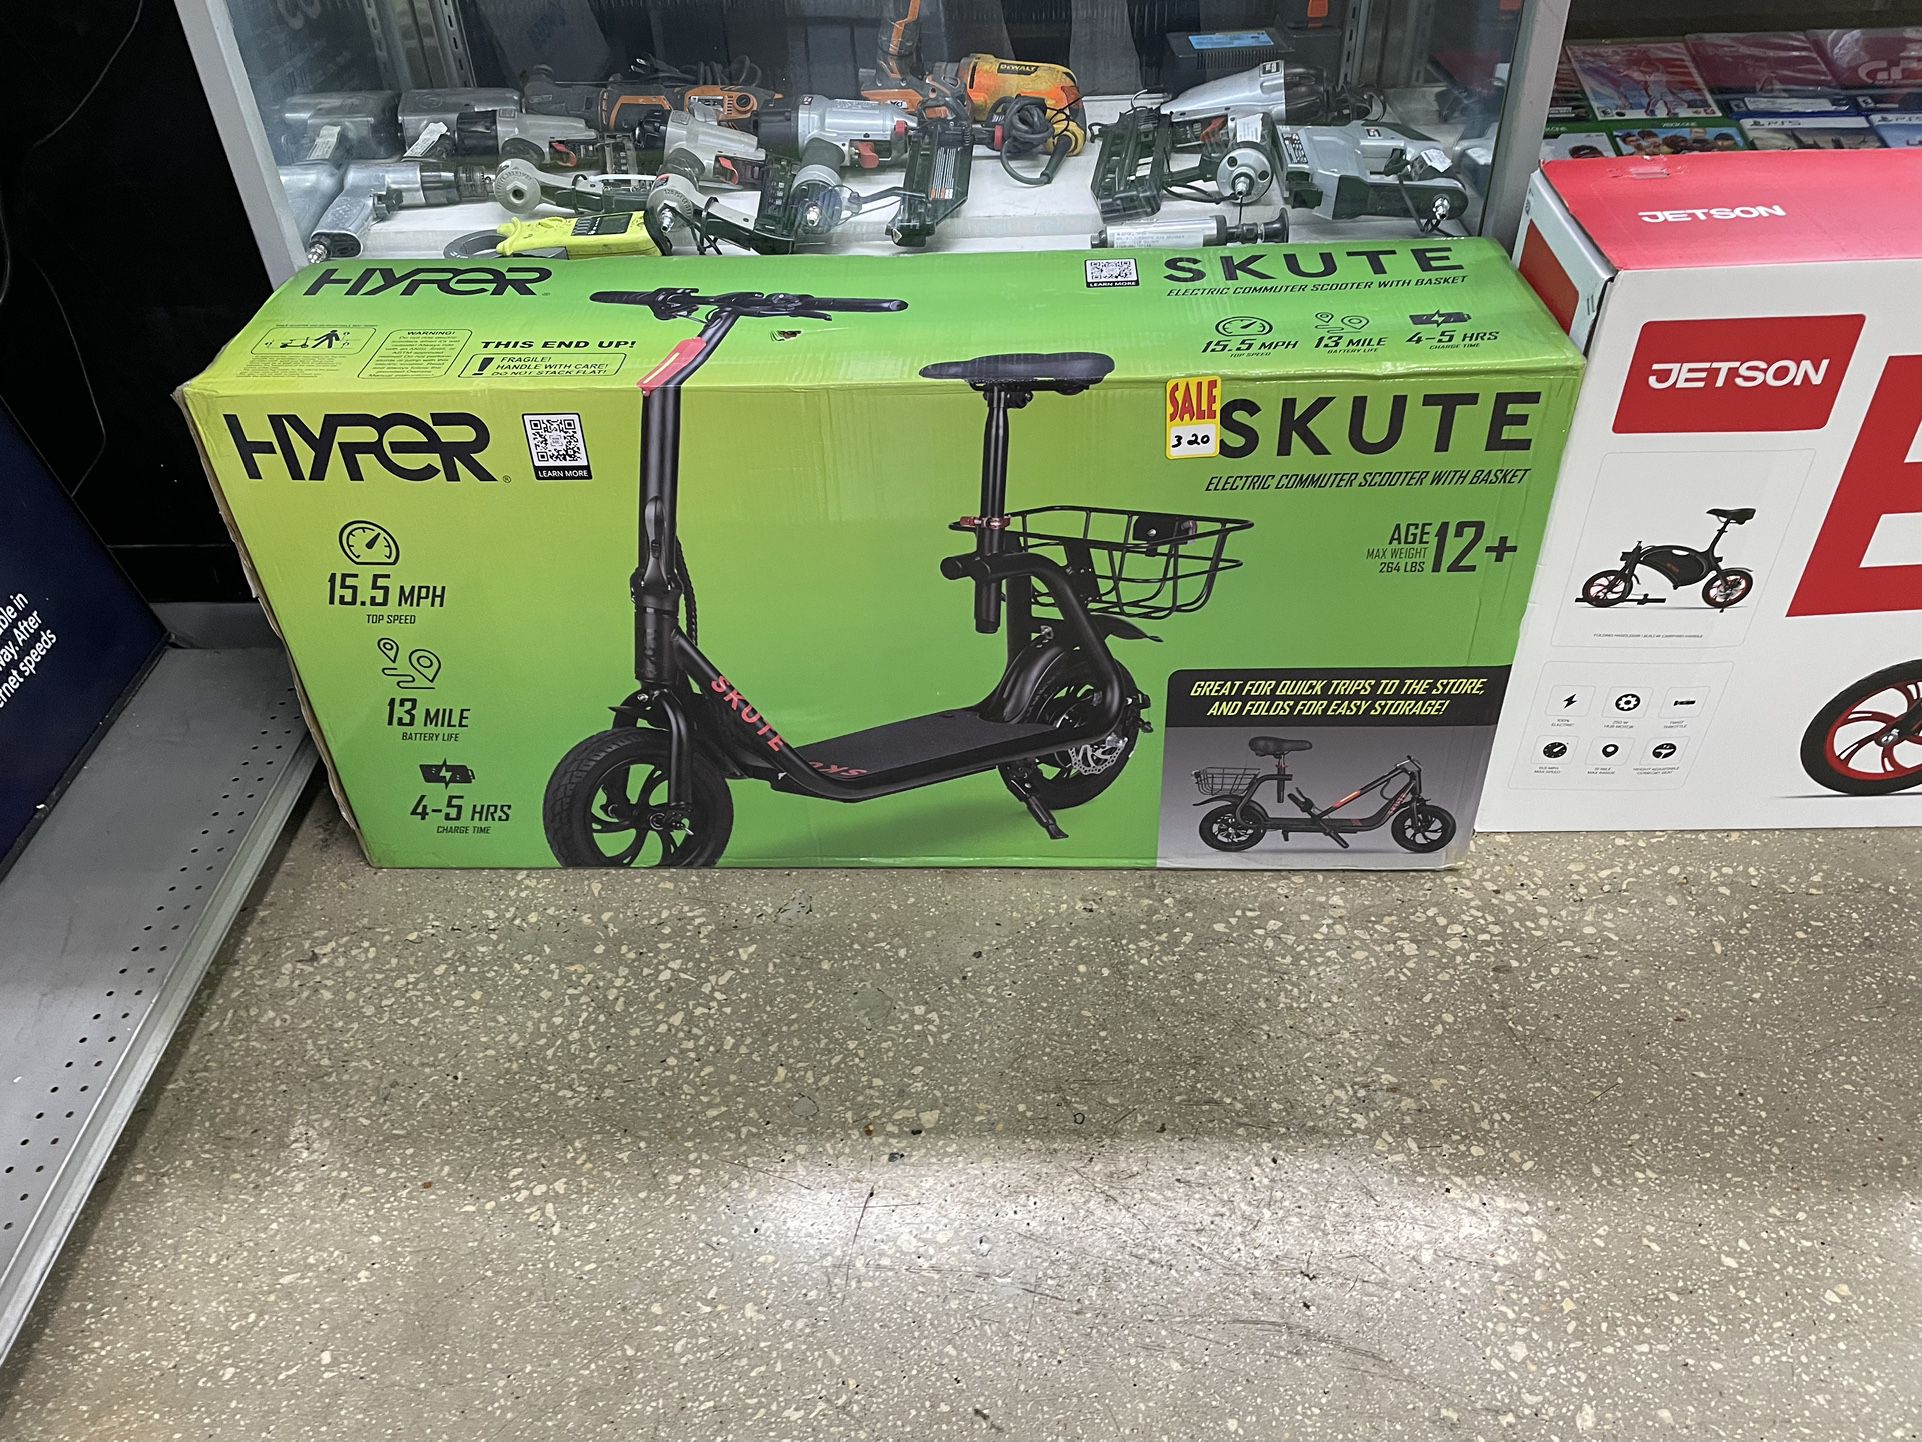 Hyper Skute Electric Commuter Scooter With Basket 15.5 MPH 